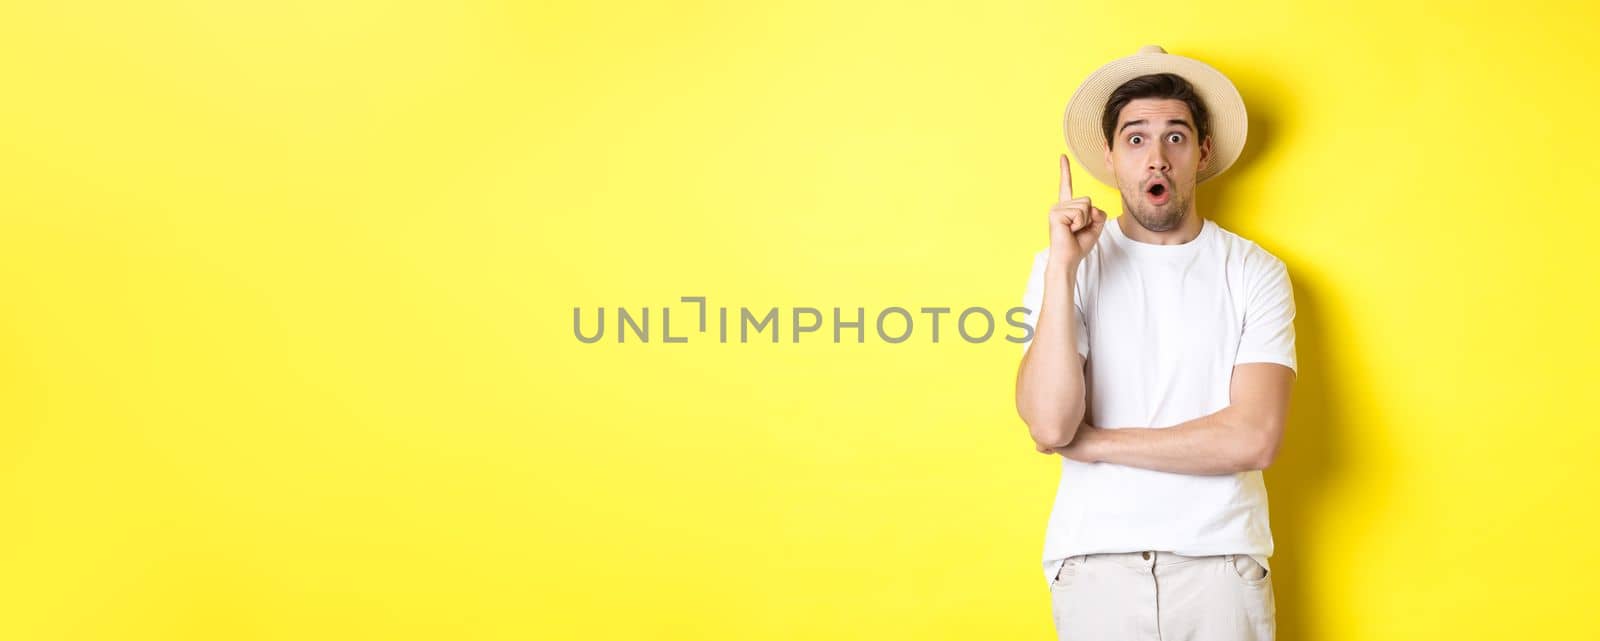 Portrait of young man in straw hat having an idea, raising finger eureka sign, making suggestion, standing over yellow background.